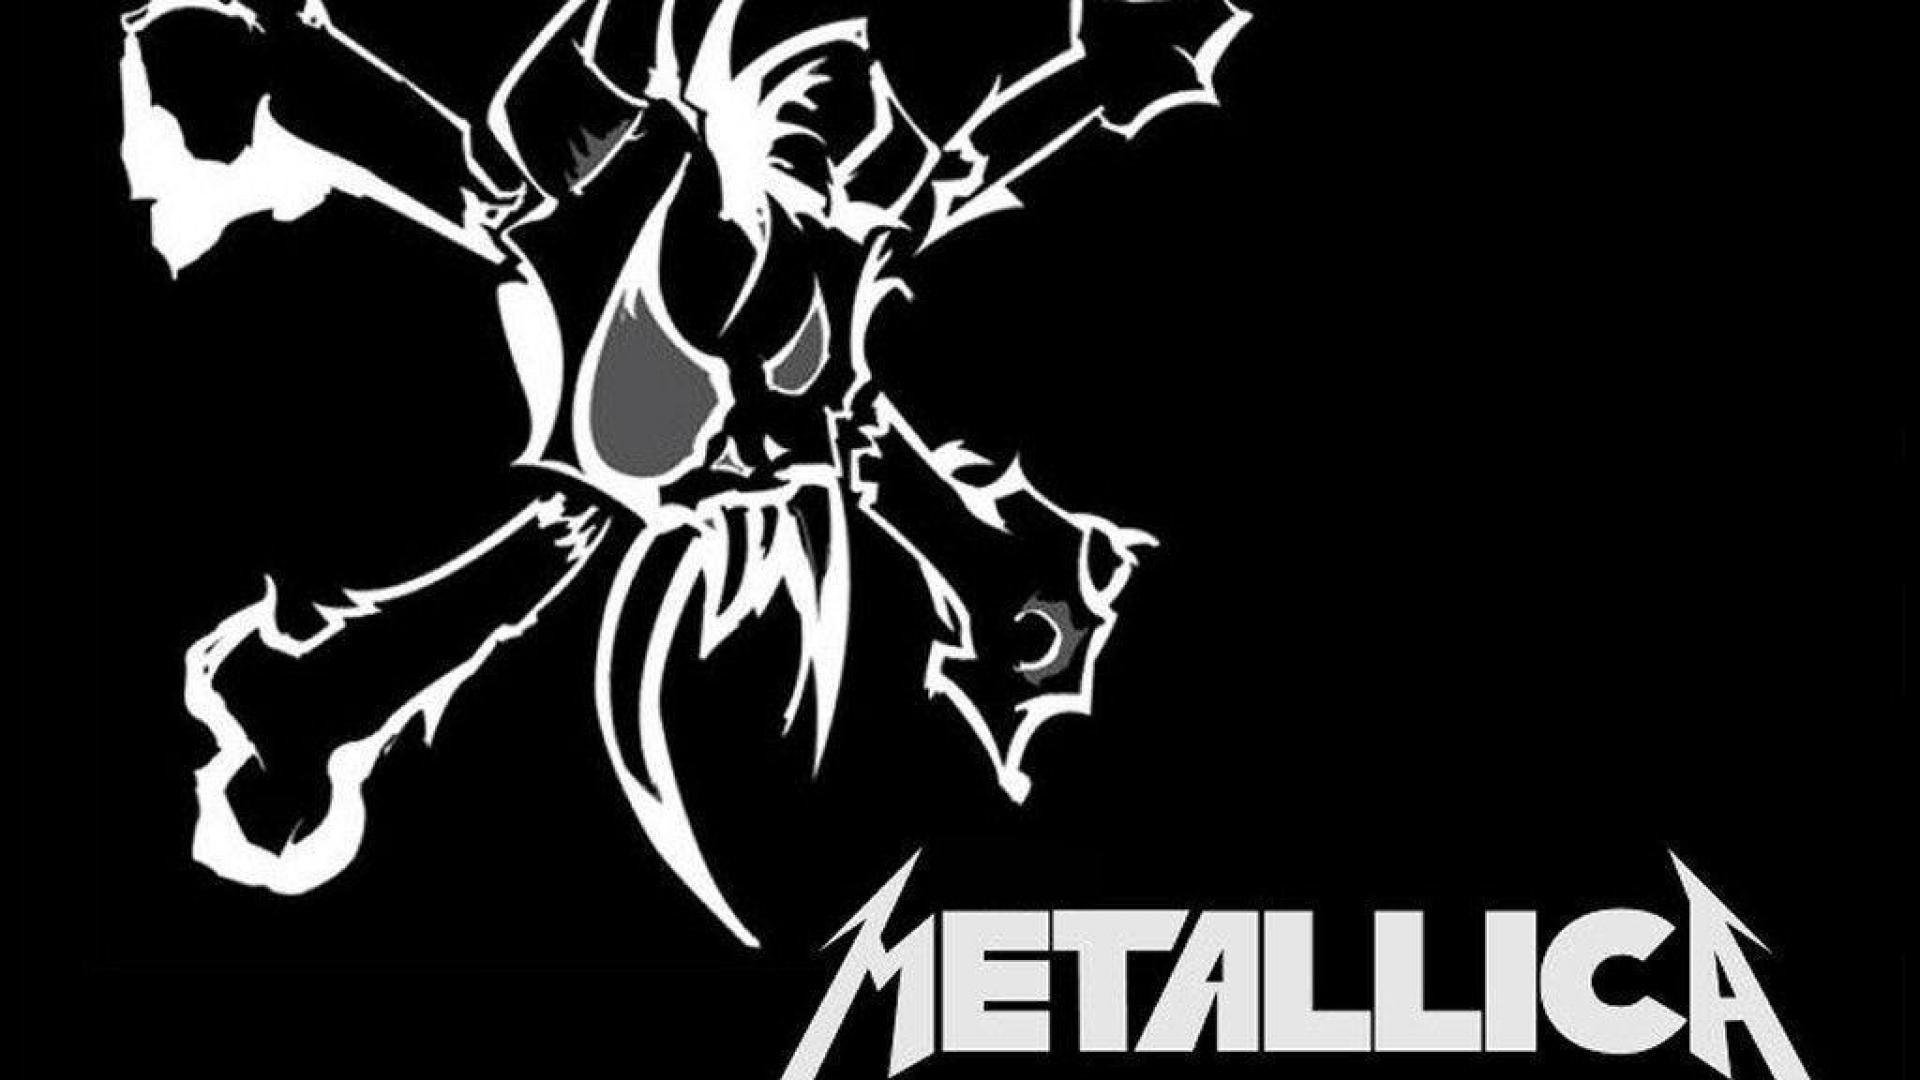 1920x1080 Metallica HD Wallpapers and Backgrounds 1920Ã1080 Metalica Wallpapers (40  Wallpapers) | Adorable